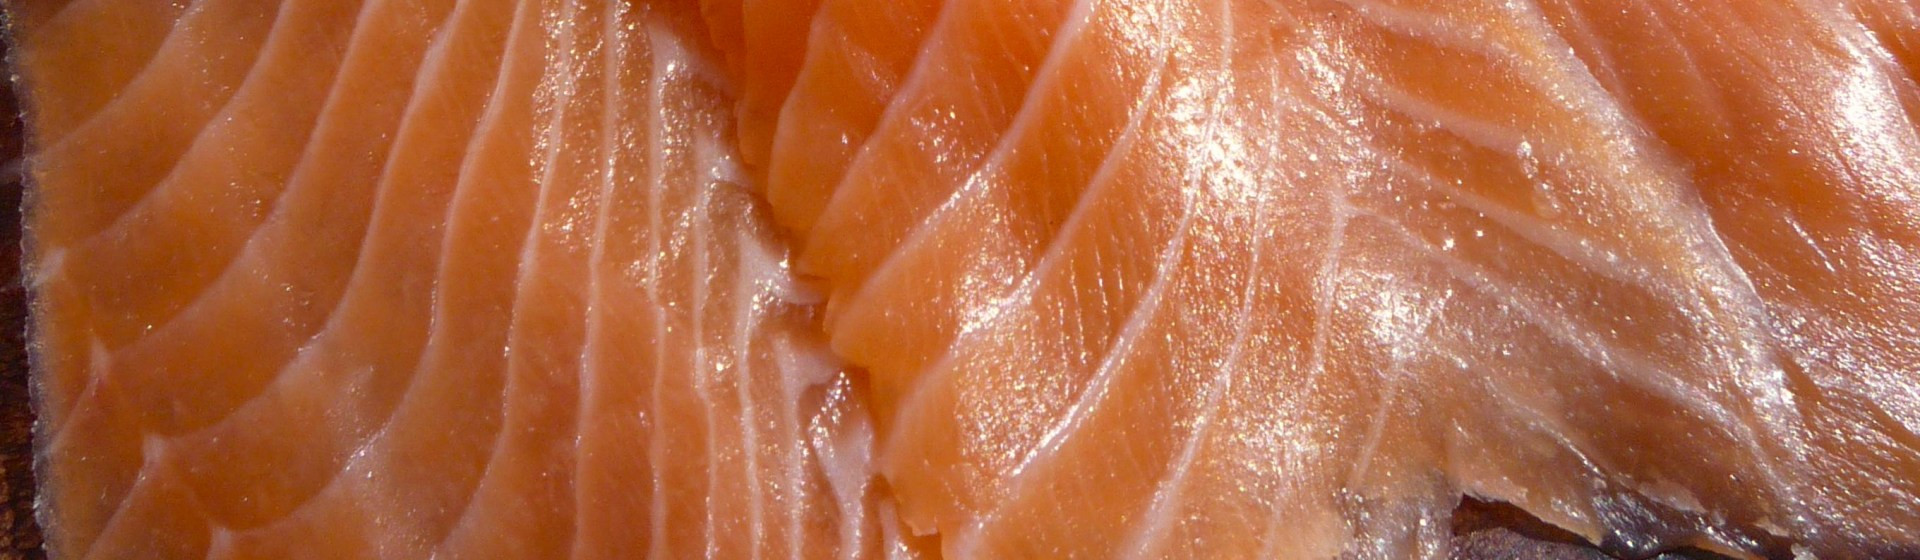 Types Of Smoked Salmon
 What s The Difference Between Smoked Salmon And Lox